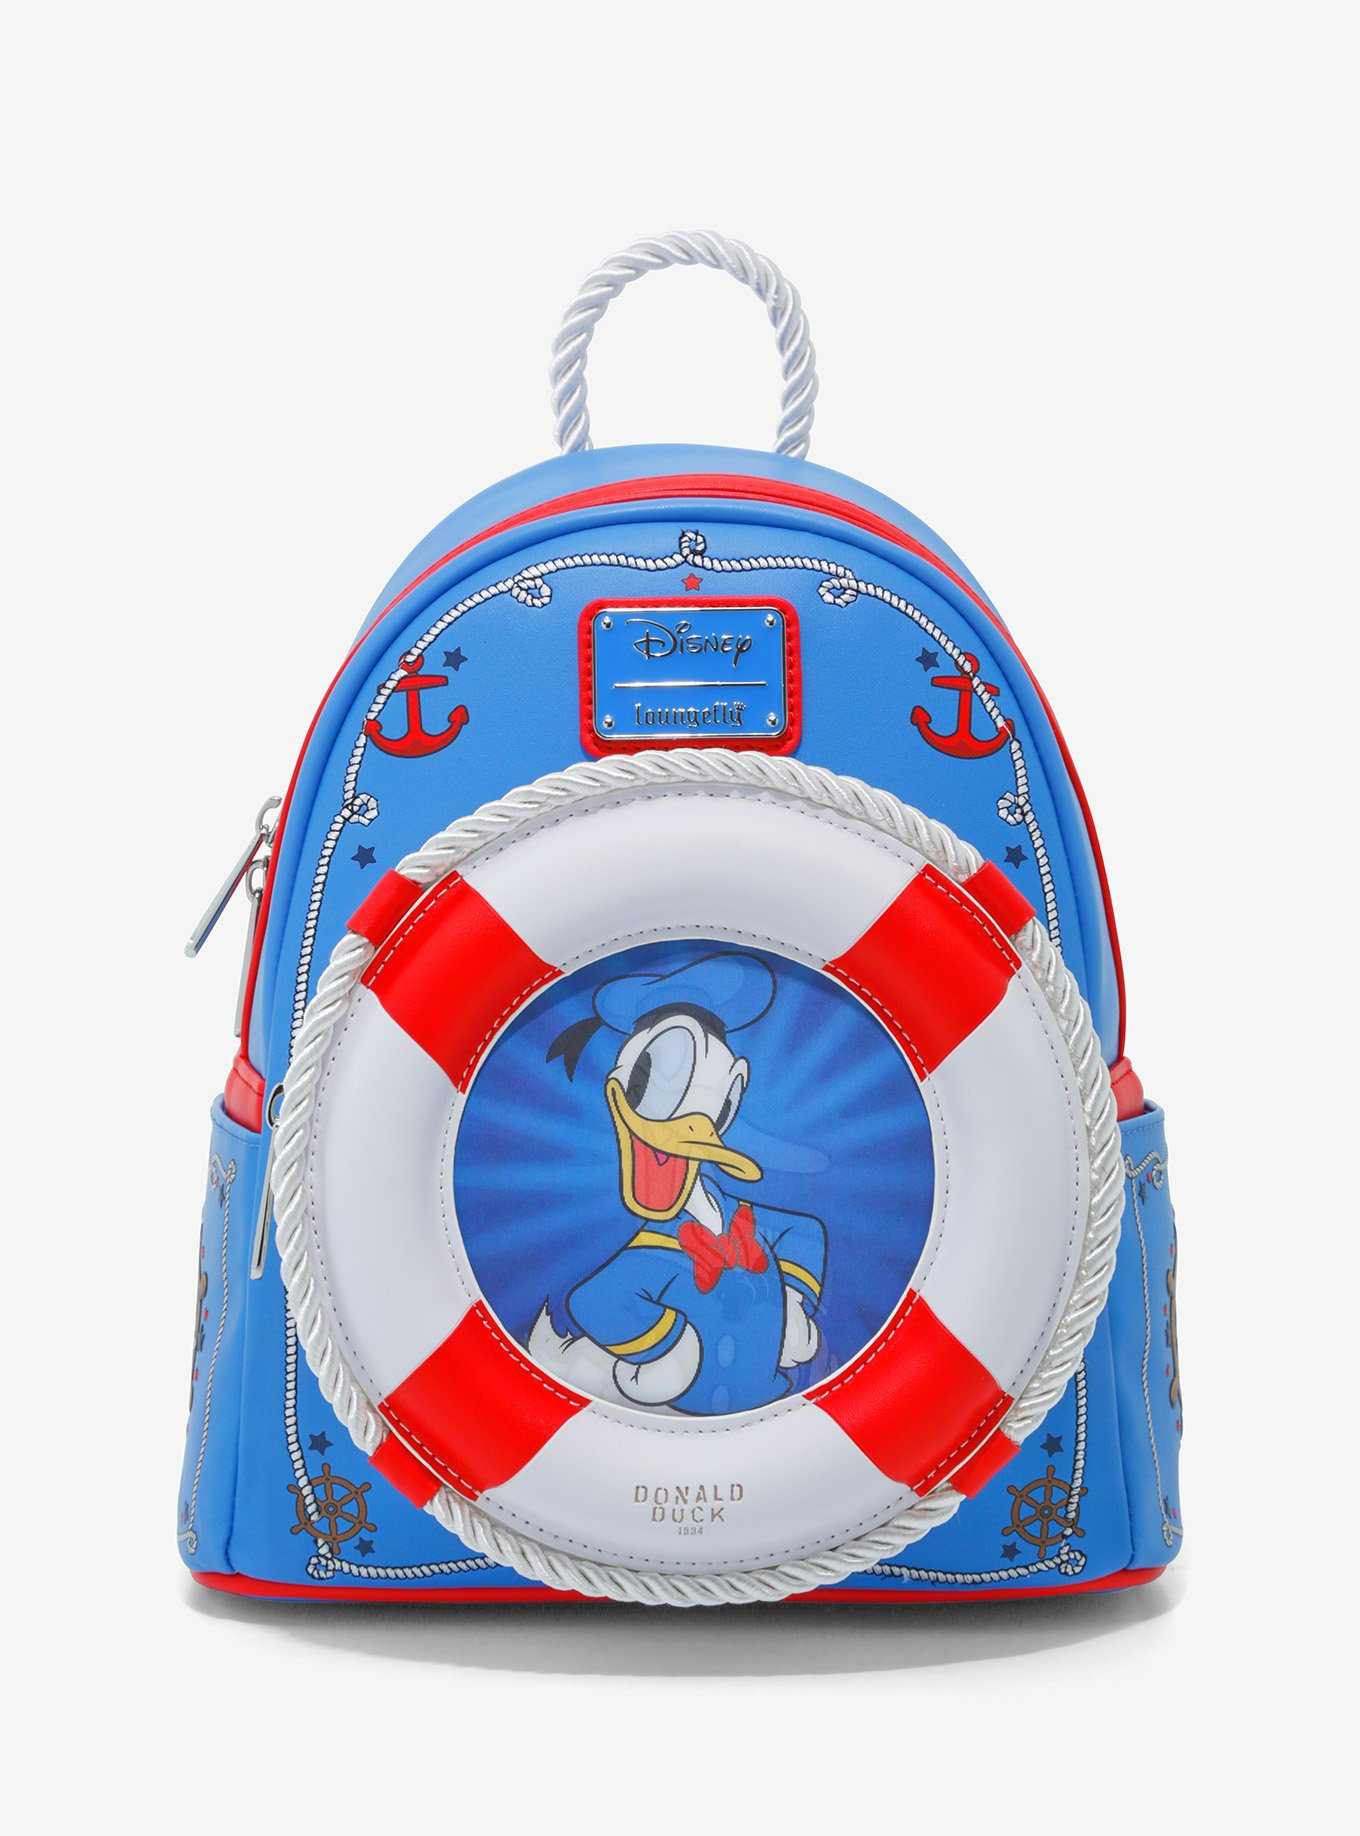 Loungefly Disney Donald Duck 90th Anniversary Lenticular Mini Backpack, , hi-res